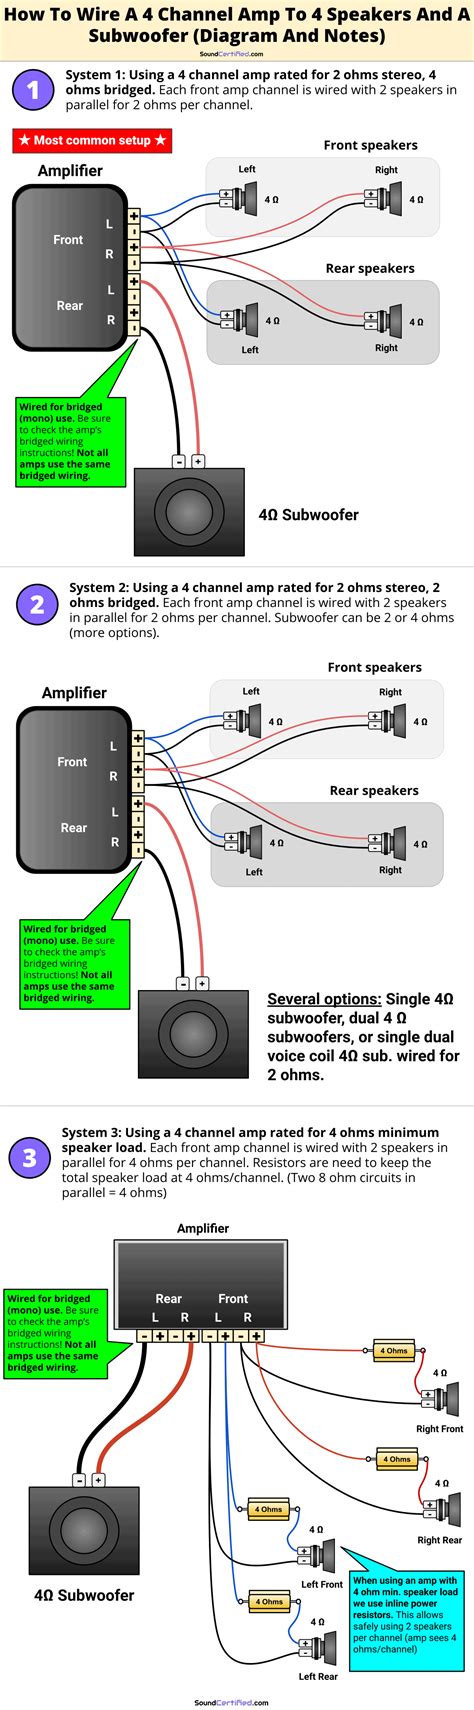 Remove the wiring harness from your 2001 chevy suburban sub woofer. How To Wire A 4 Channel Amp To 4 Speakers And A Sub: A Detailed Guide With Diagrams